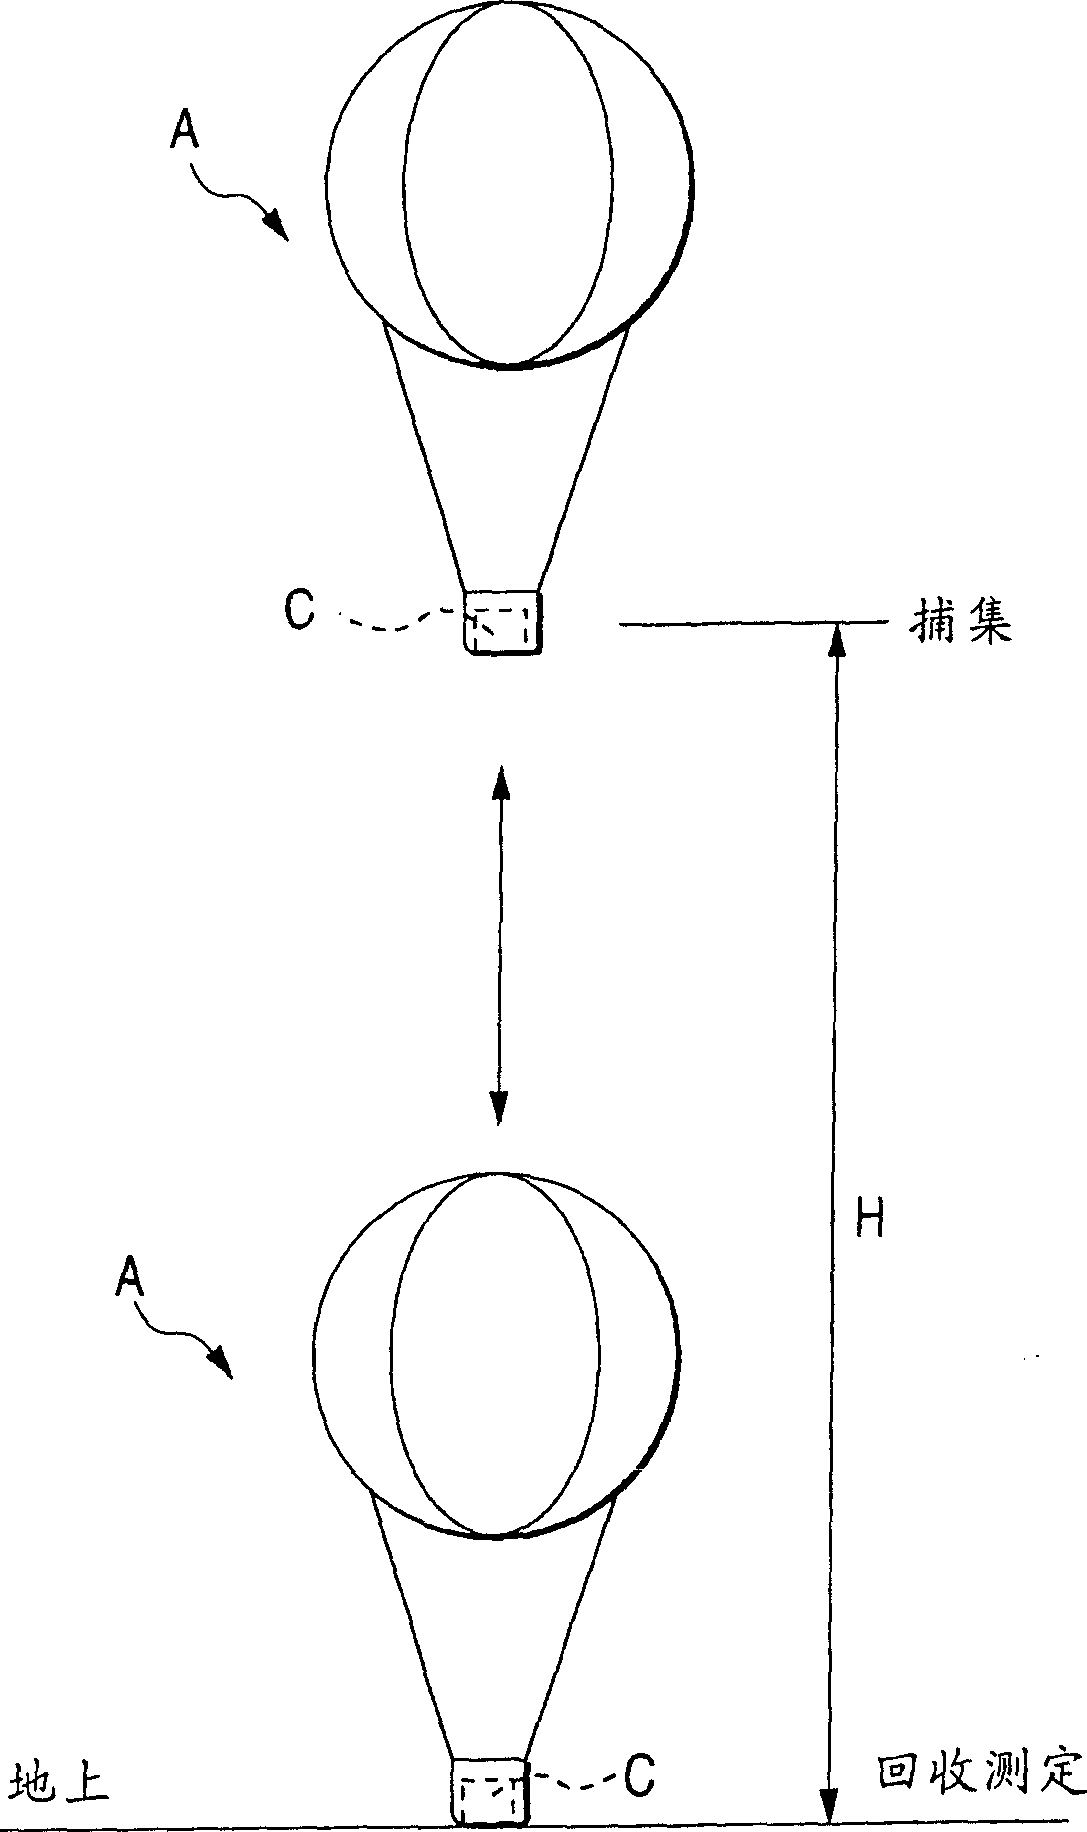 Method and apparatus for measuring suspension particles in air